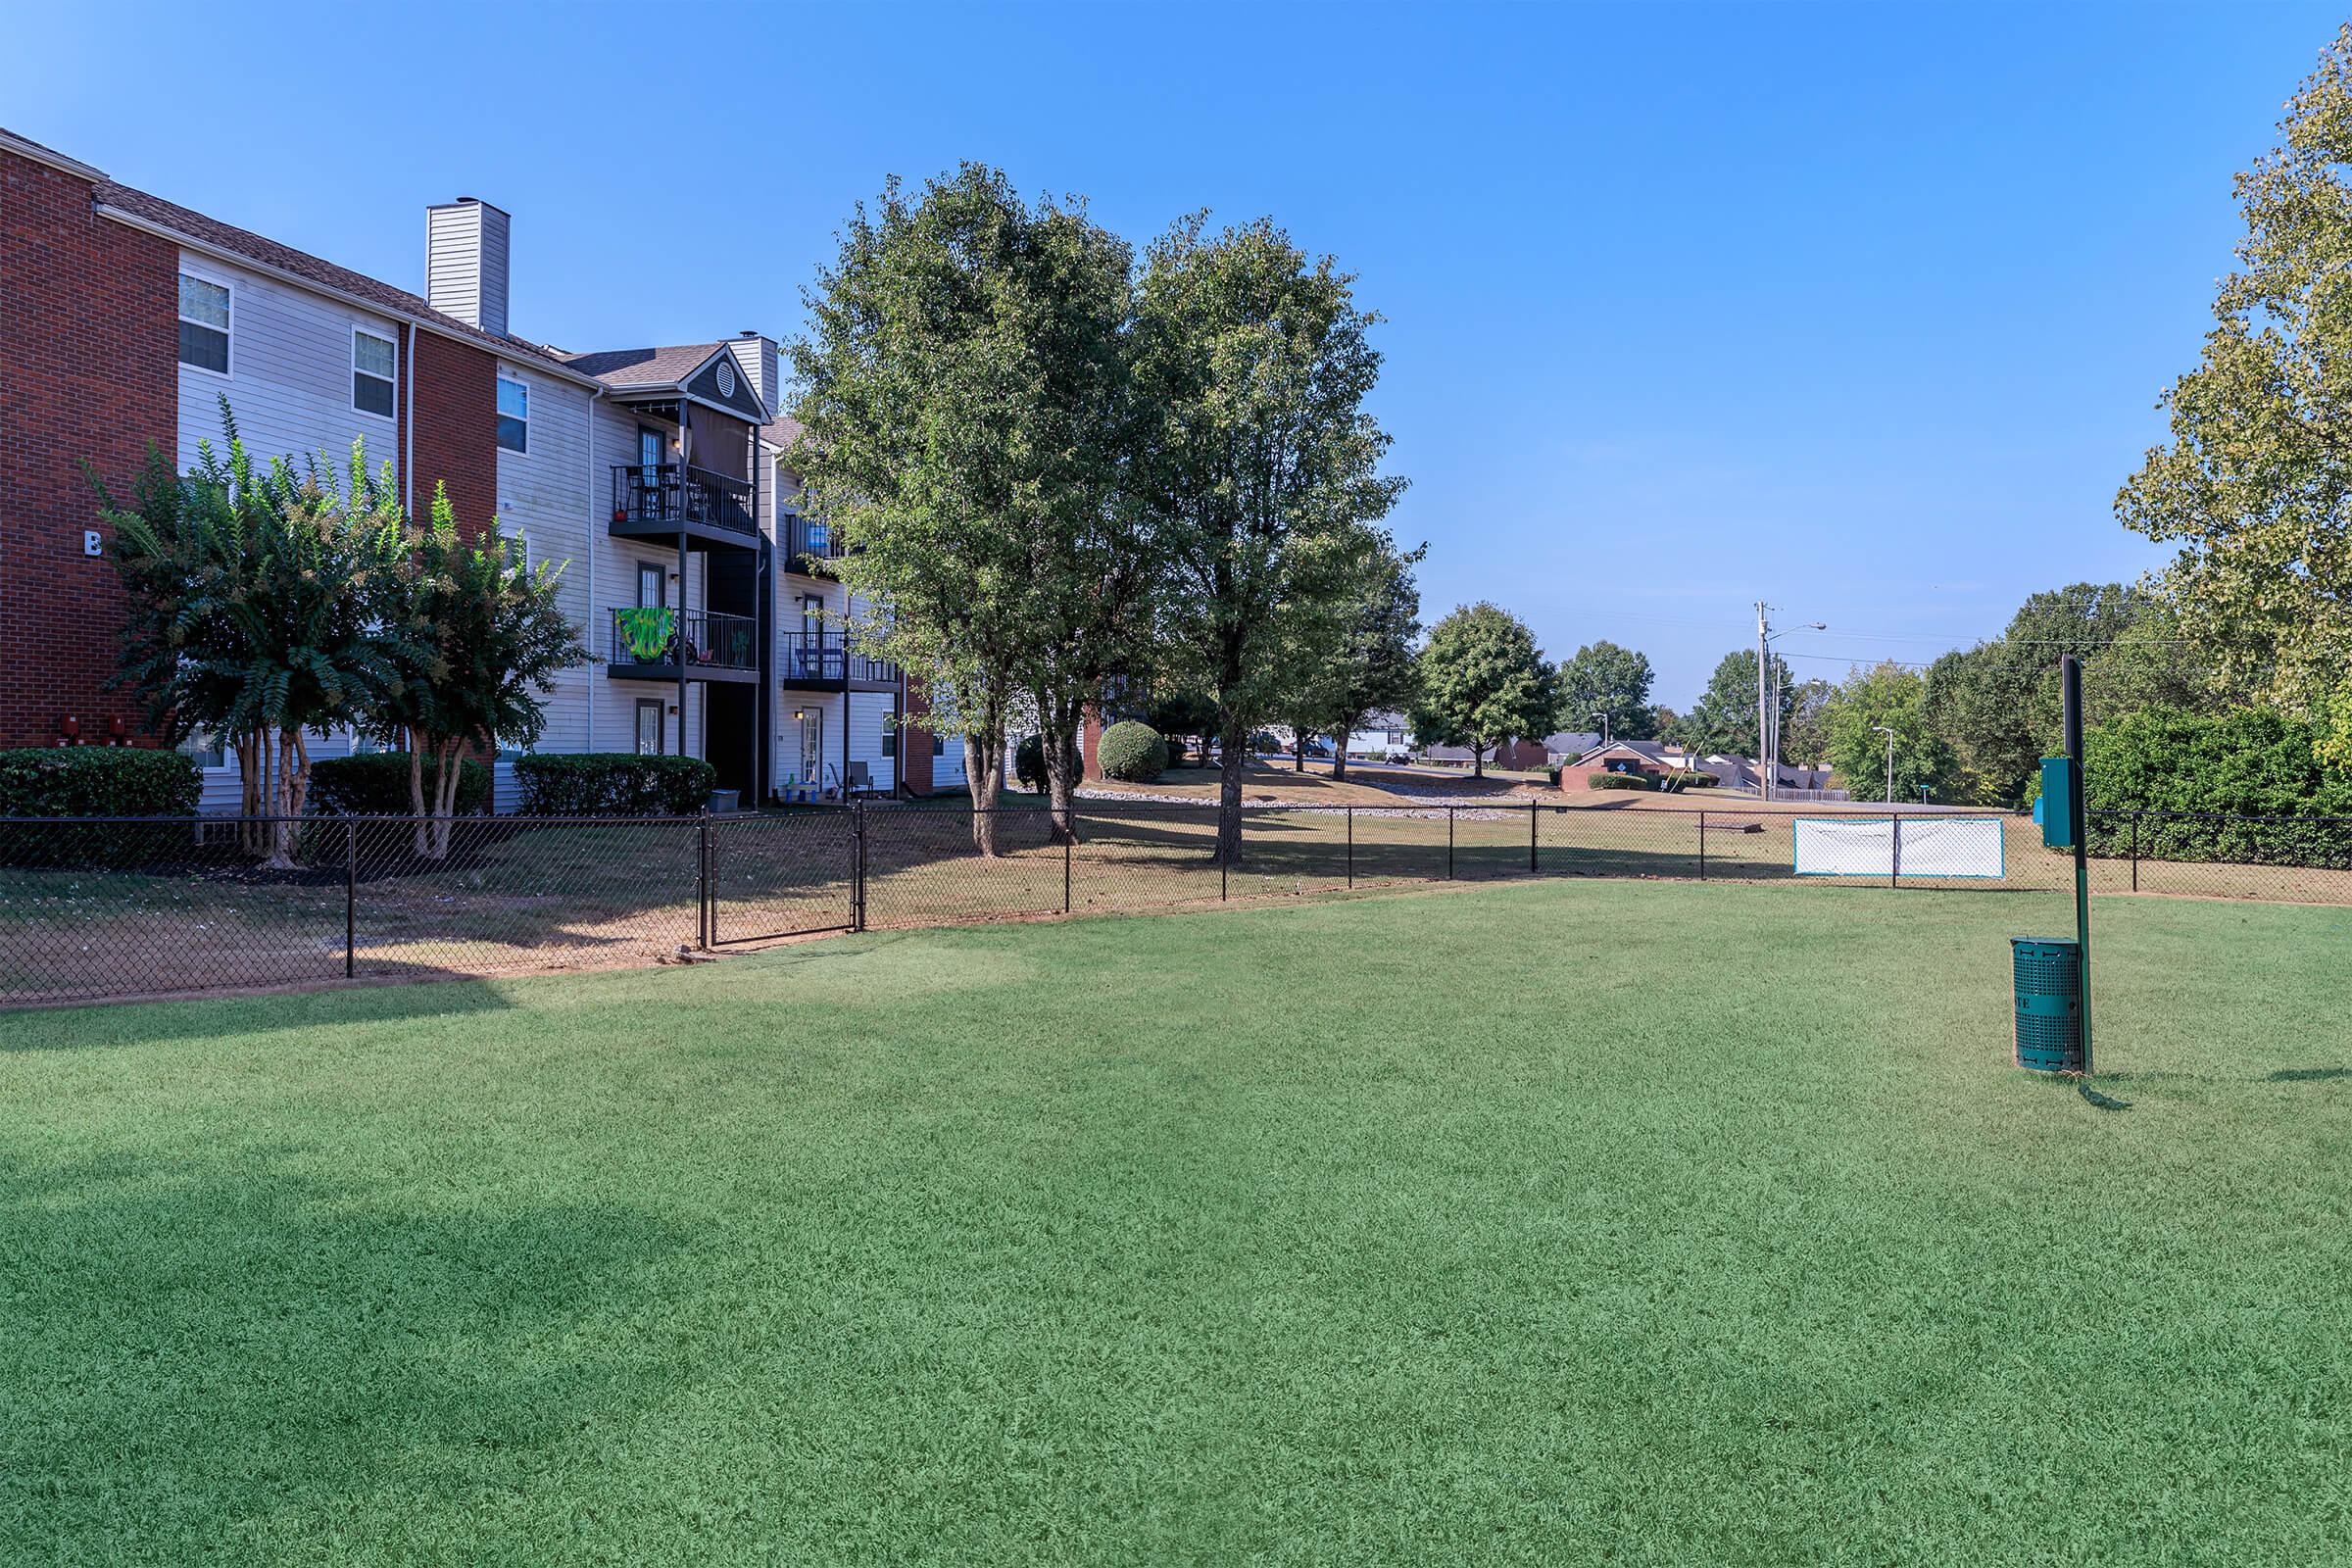 Discover our pet park here at Graymere in Columbia, Tennessee